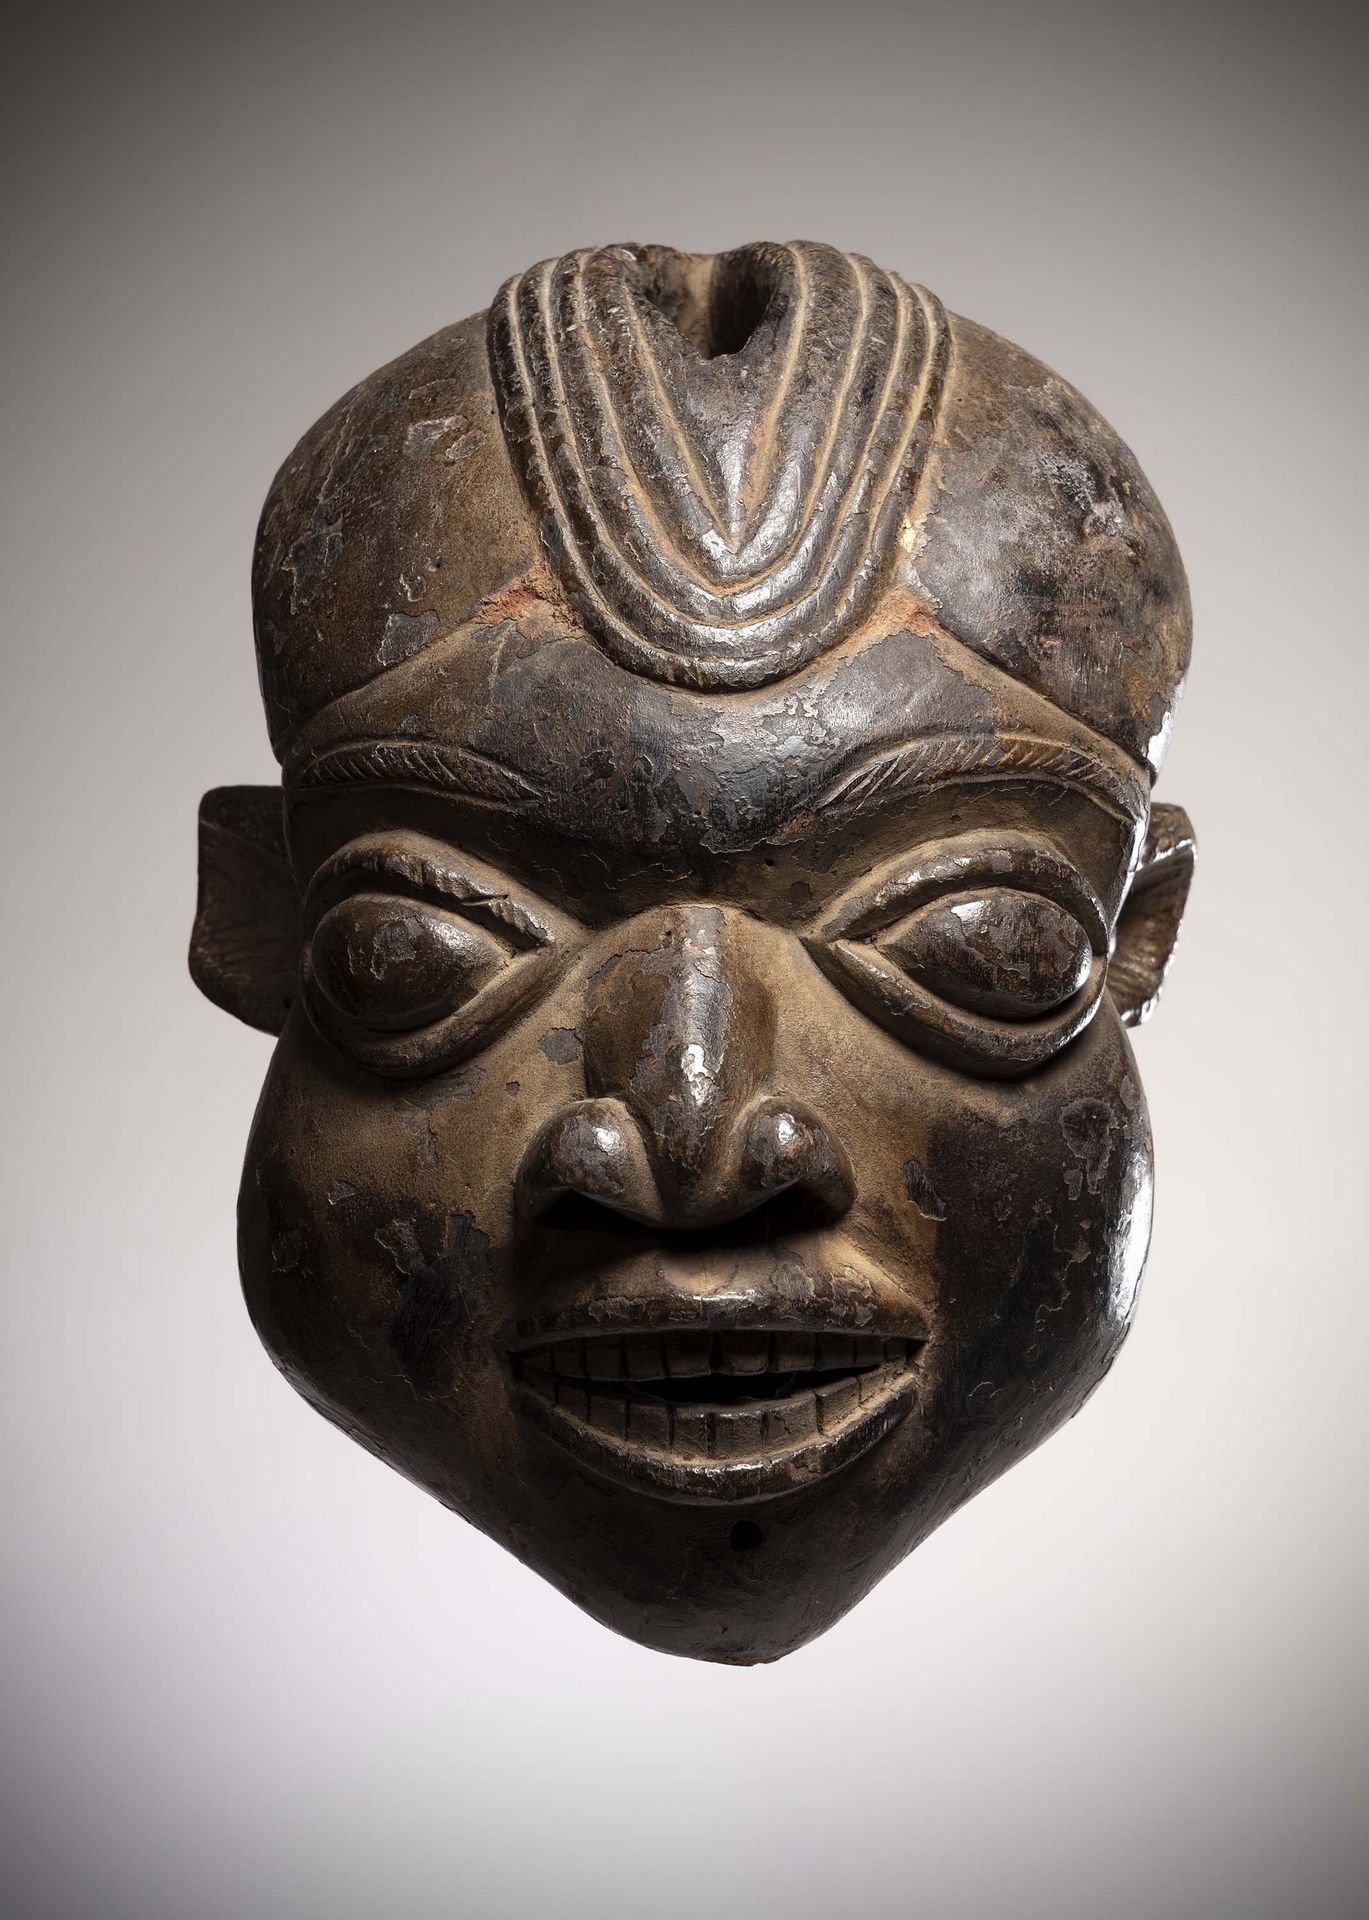 Null Bekom

(Cameroon) Beautiful example of a helmet mask from the Cameroonian G&hellip;